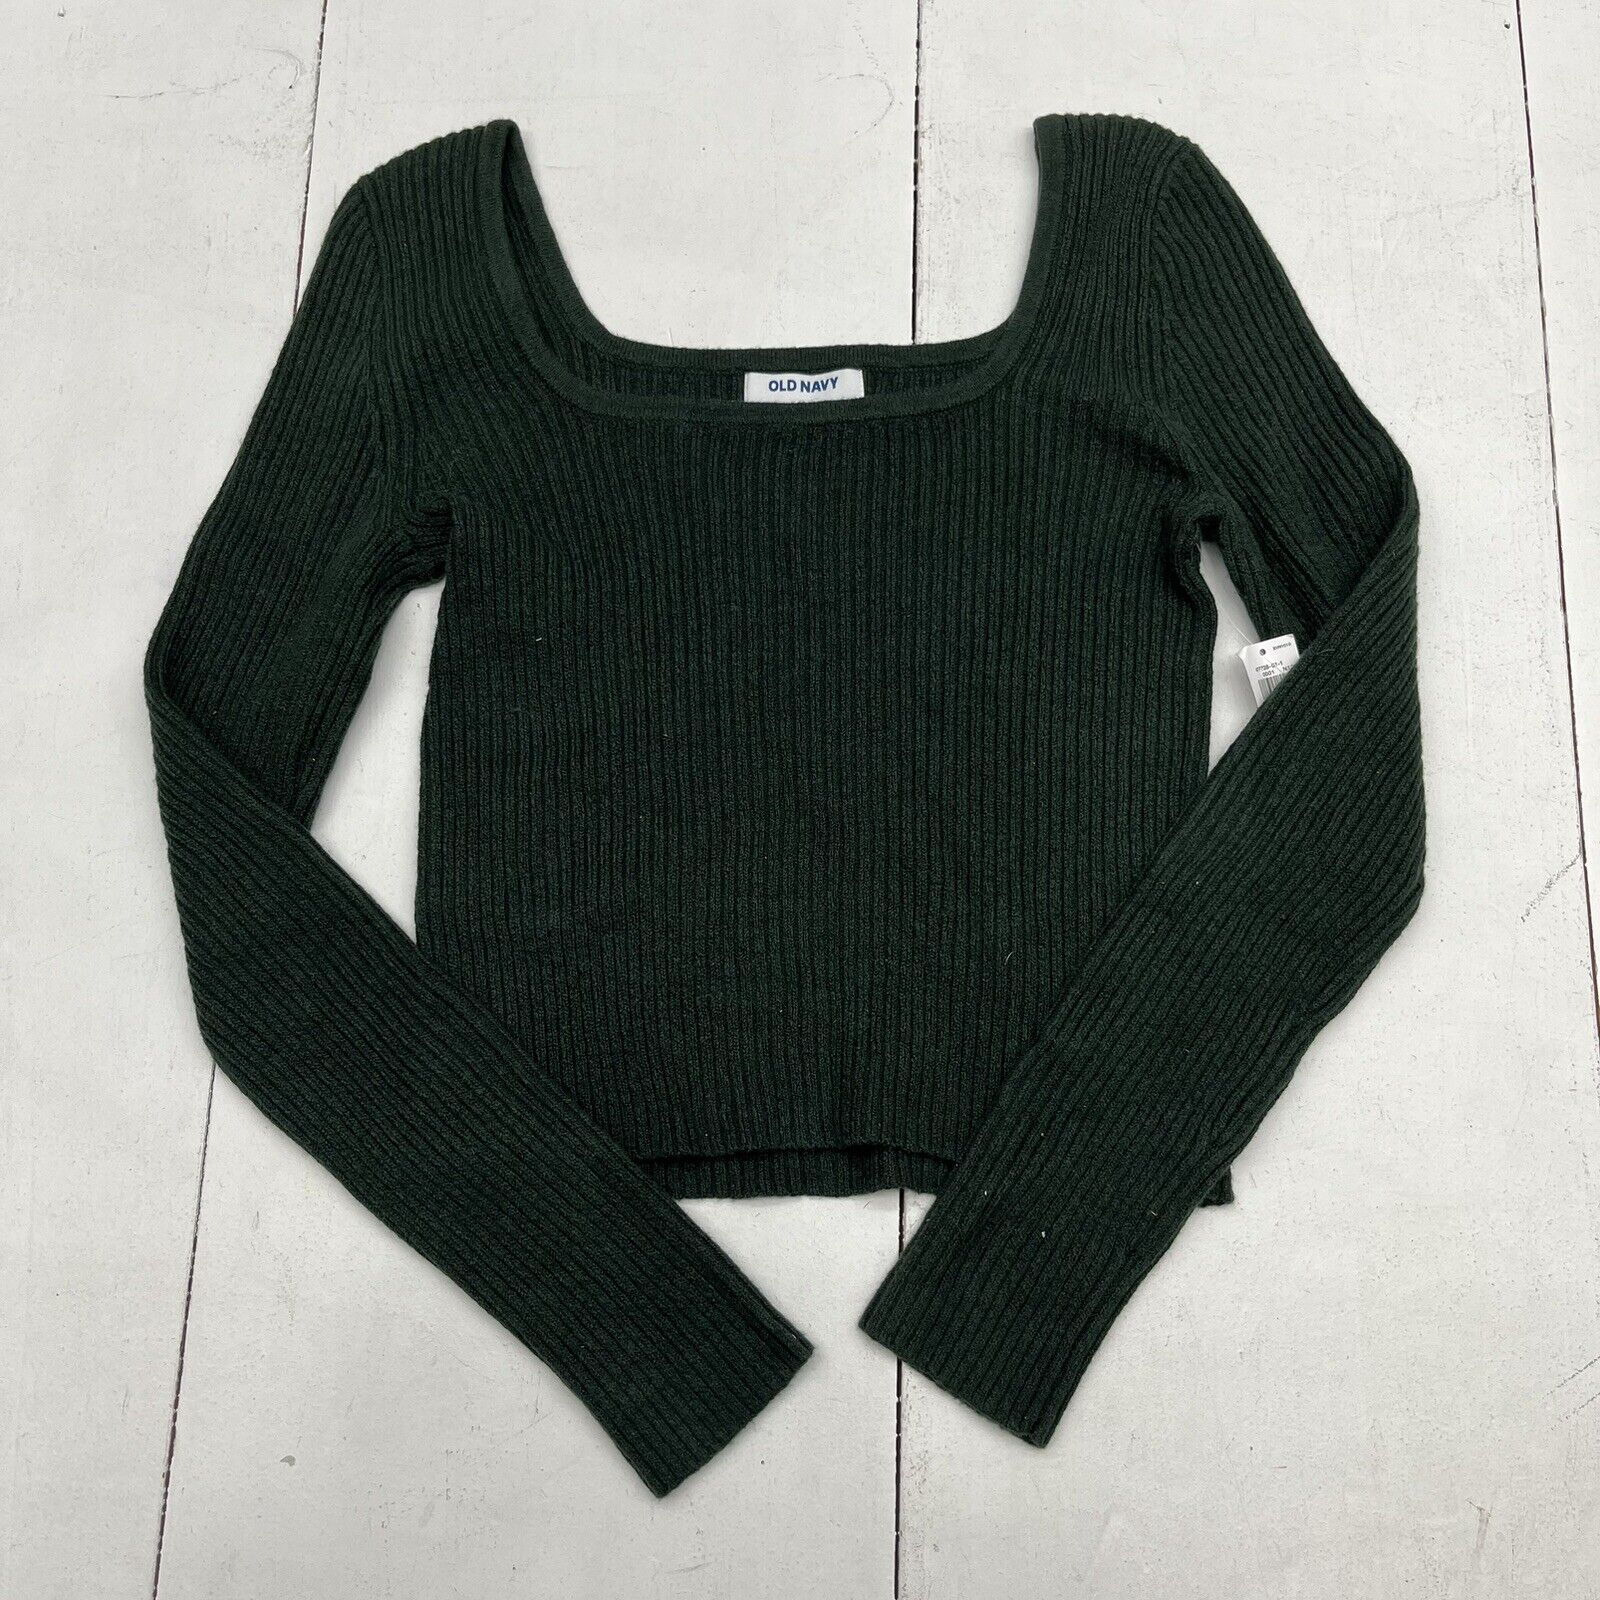 Old Navy Green Fitted Cropped Square-Neck Rib-Knit Sweater Women’s Size S NEW